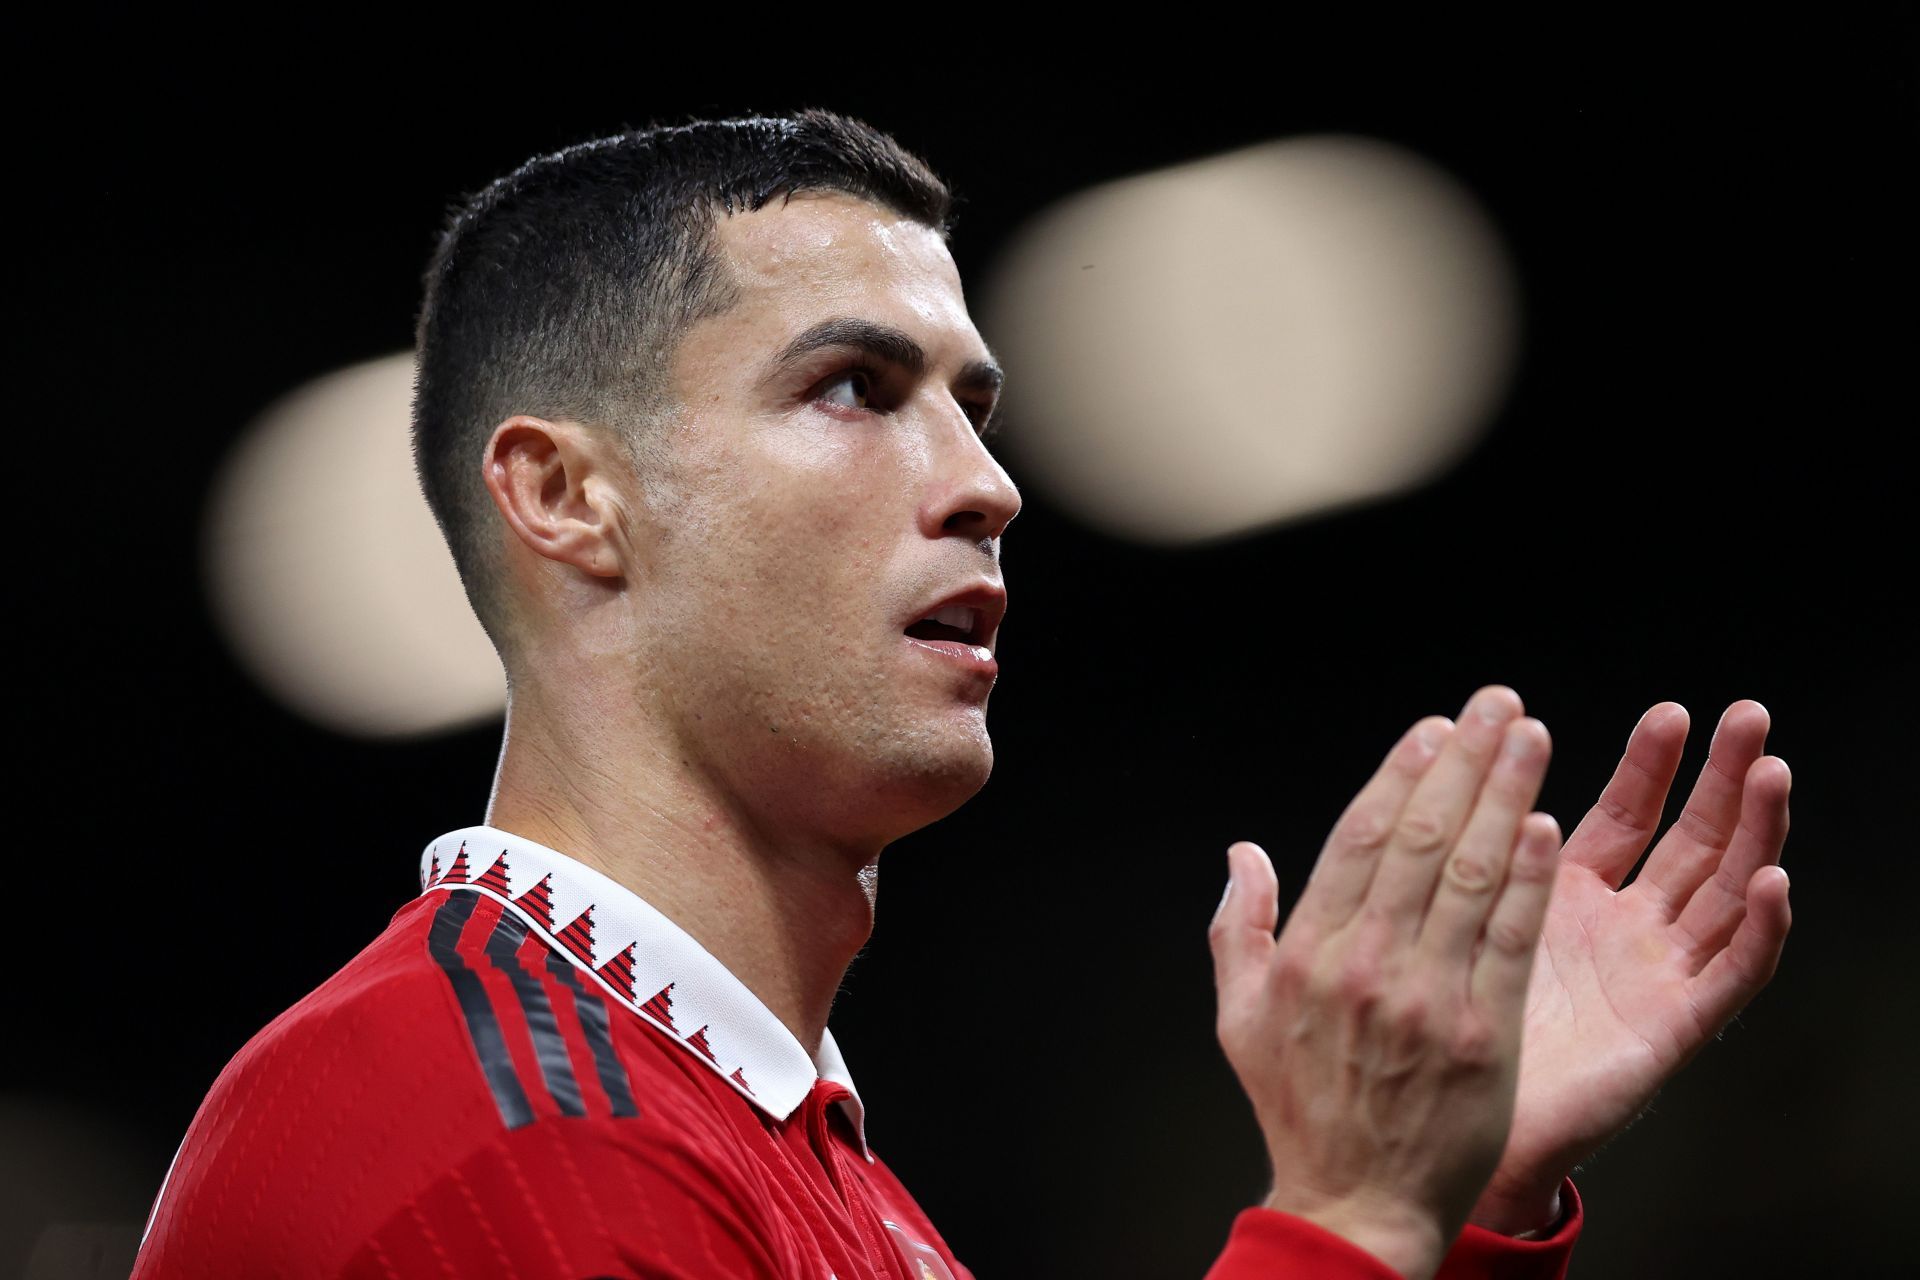 Cristiano Ronaldo and Manchester United parted ways late last year